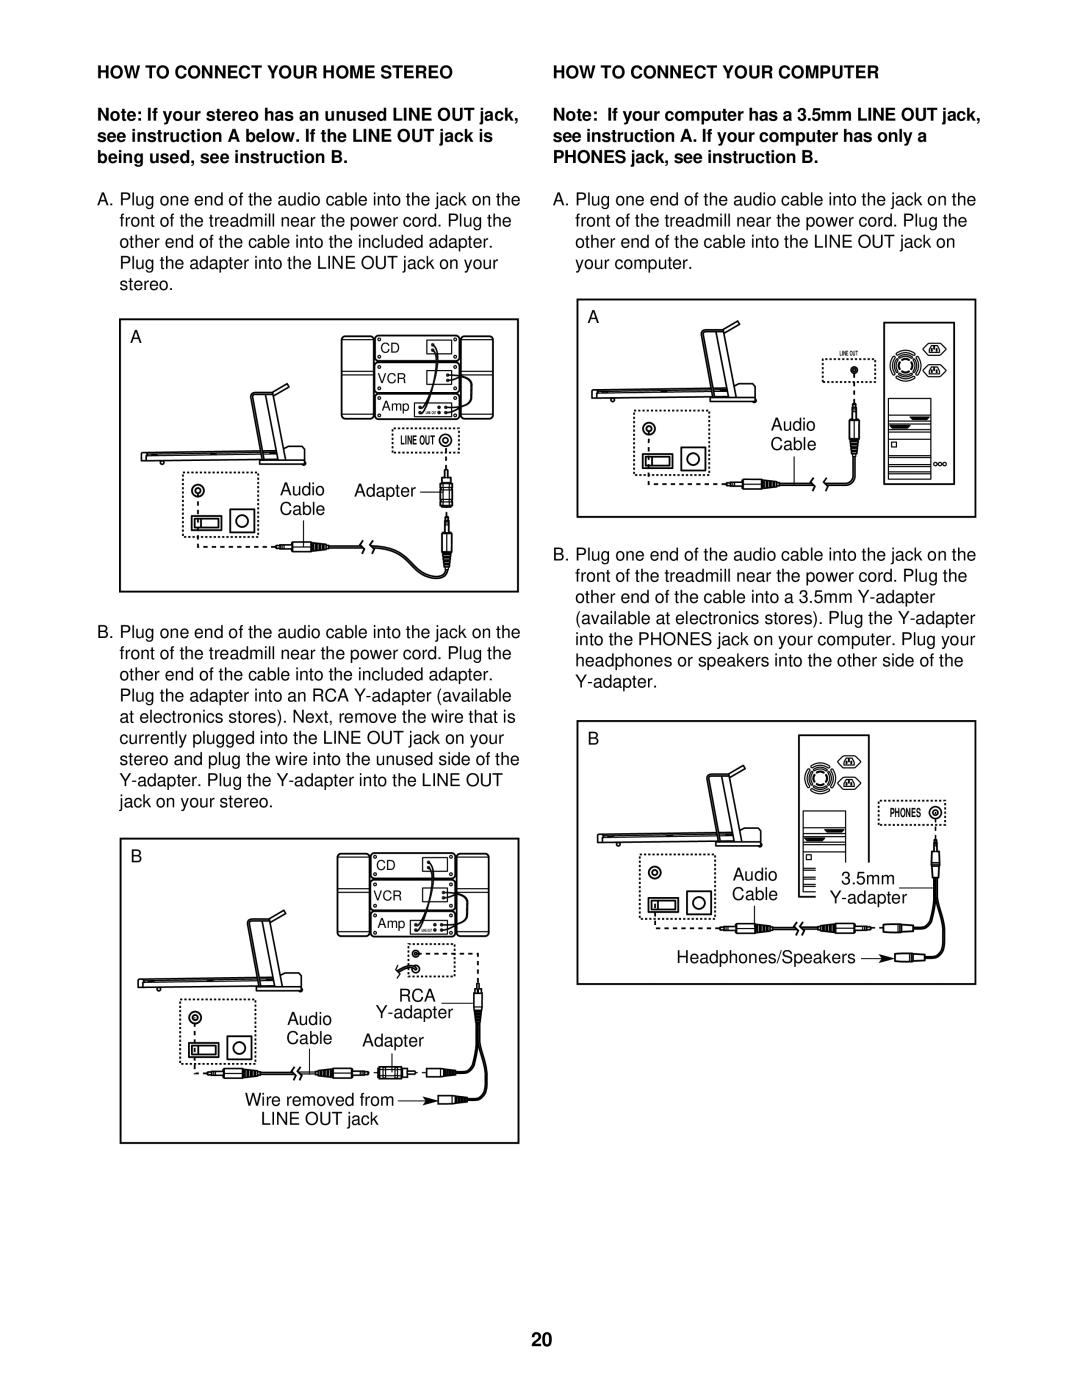 NordicTrack NTL14940 user manual HOW to Connect Your Home Stereo, HOW to Connect Your Computer 